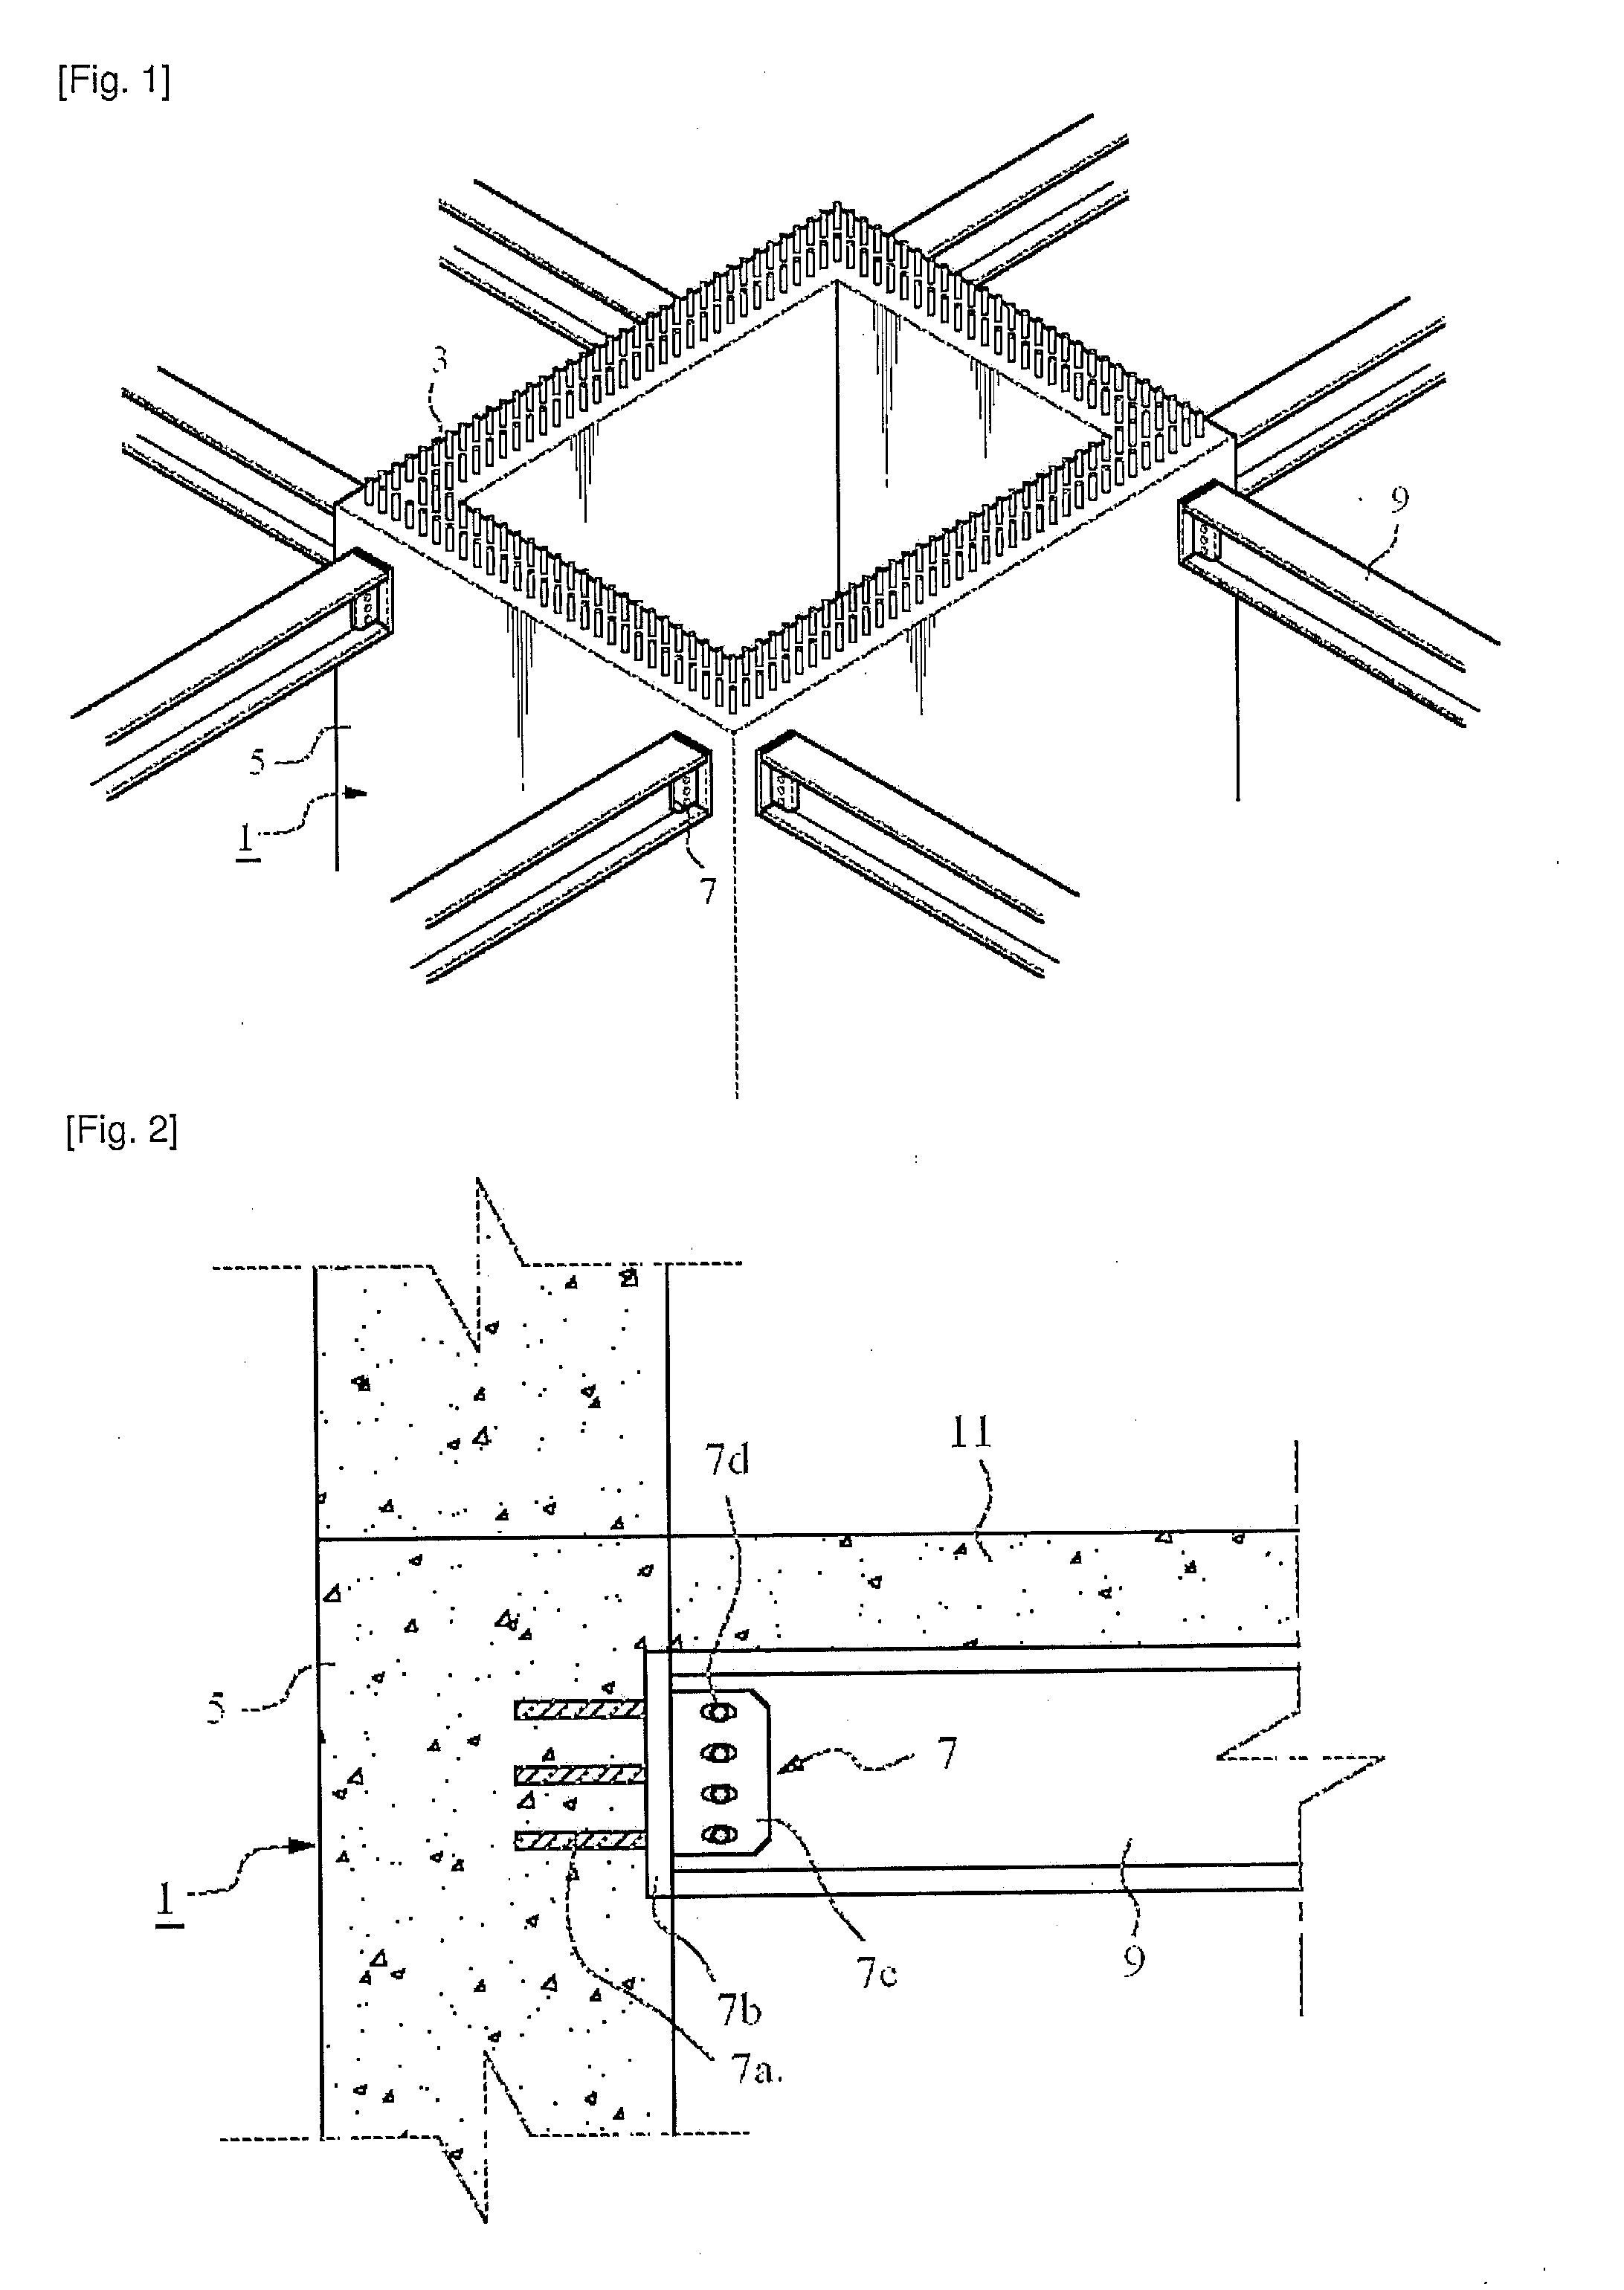 Structure For Constructing a High-Rise Building Having a Reinforced Concrete Structure Including a Steel Frame